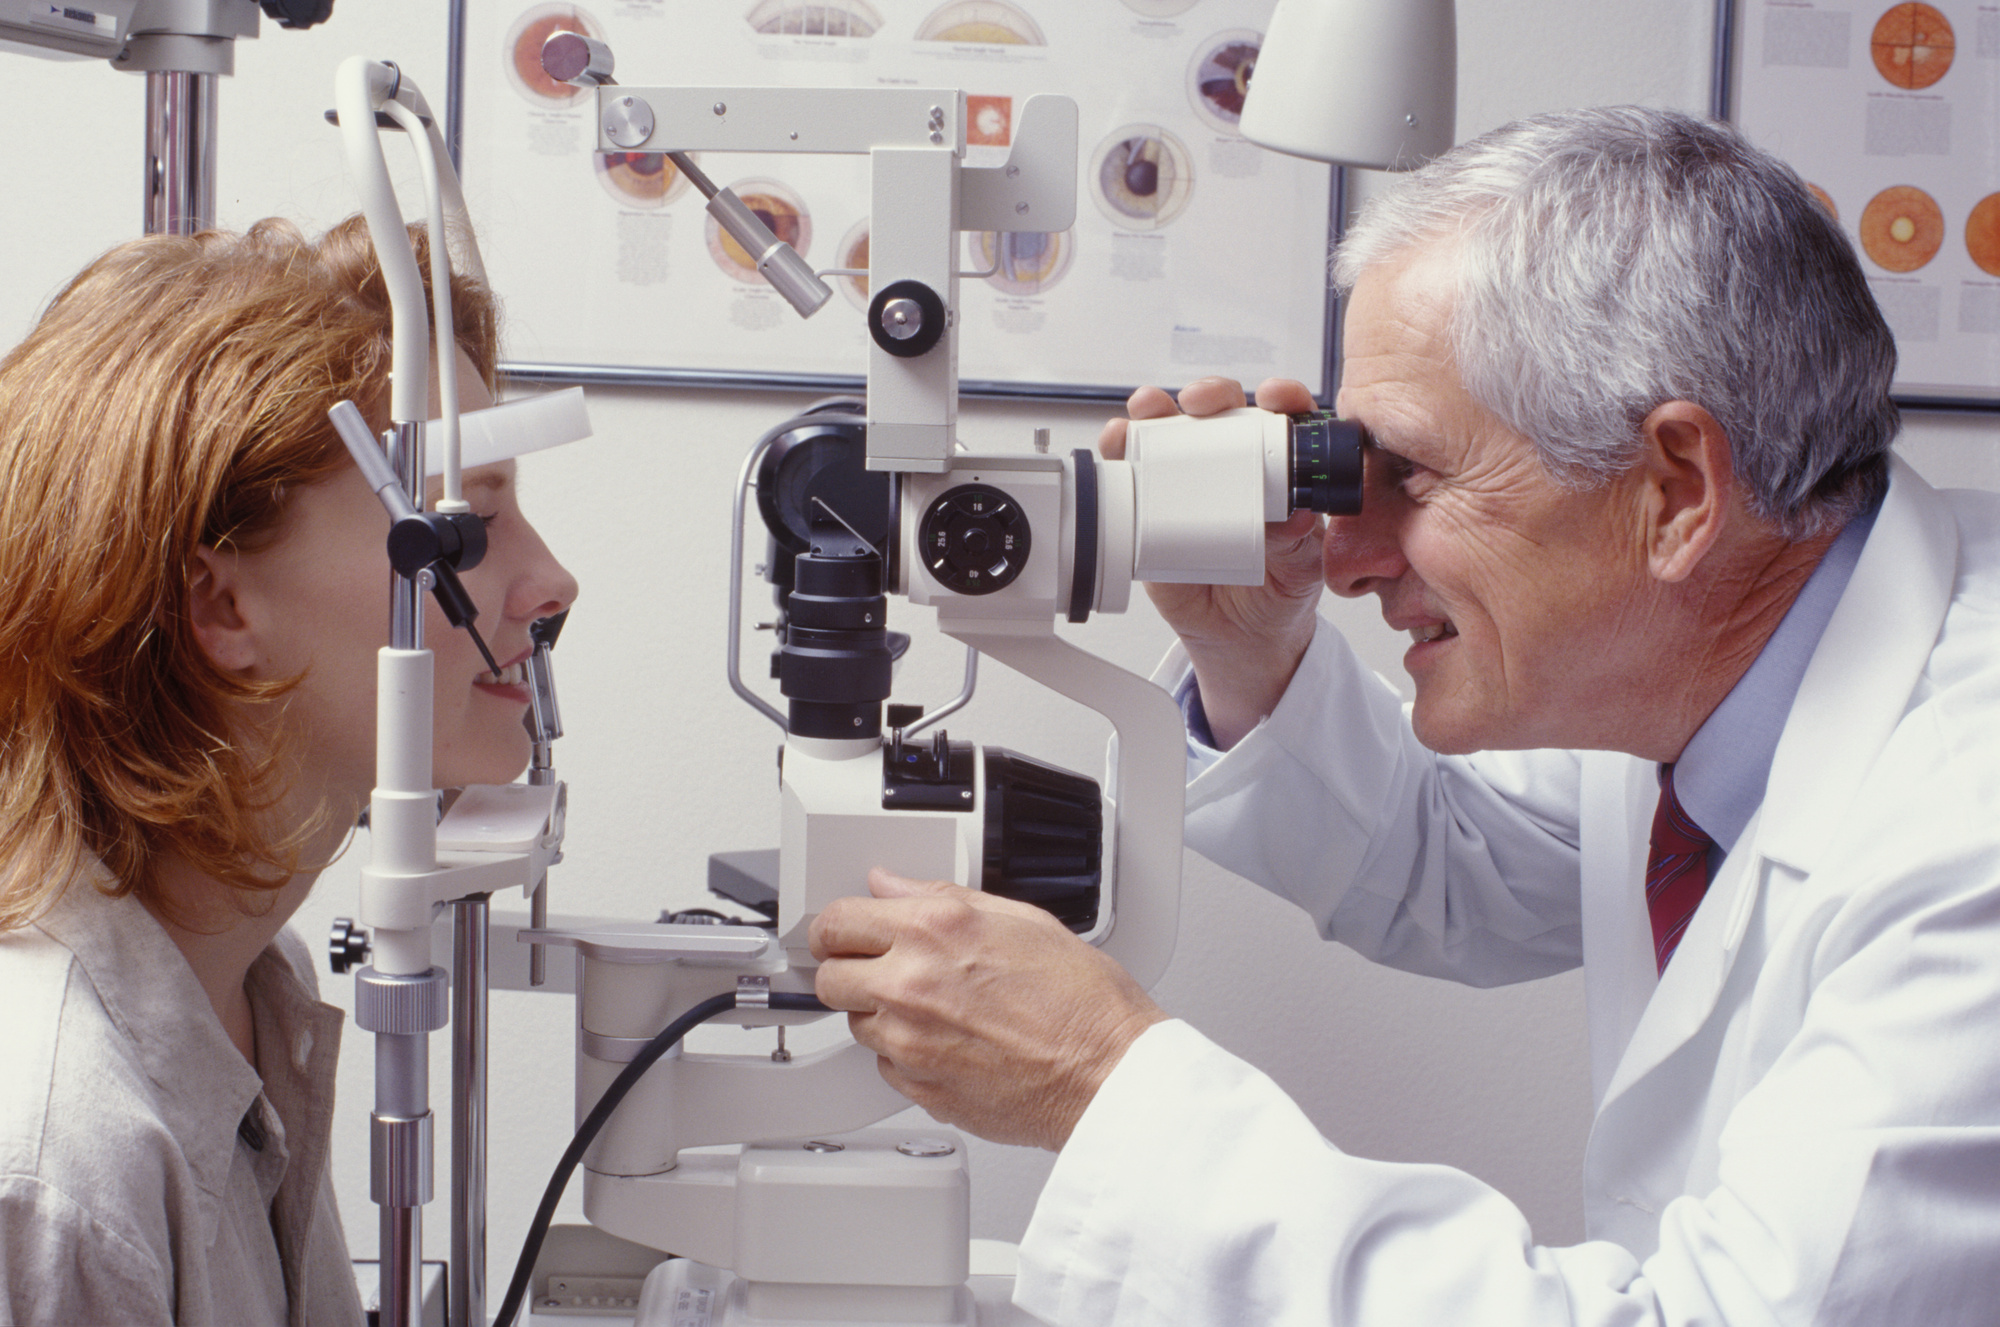 Finding the right doctor to help with your vision issues involves knowing your options. Here is everything to know about how to pick eye doctors.